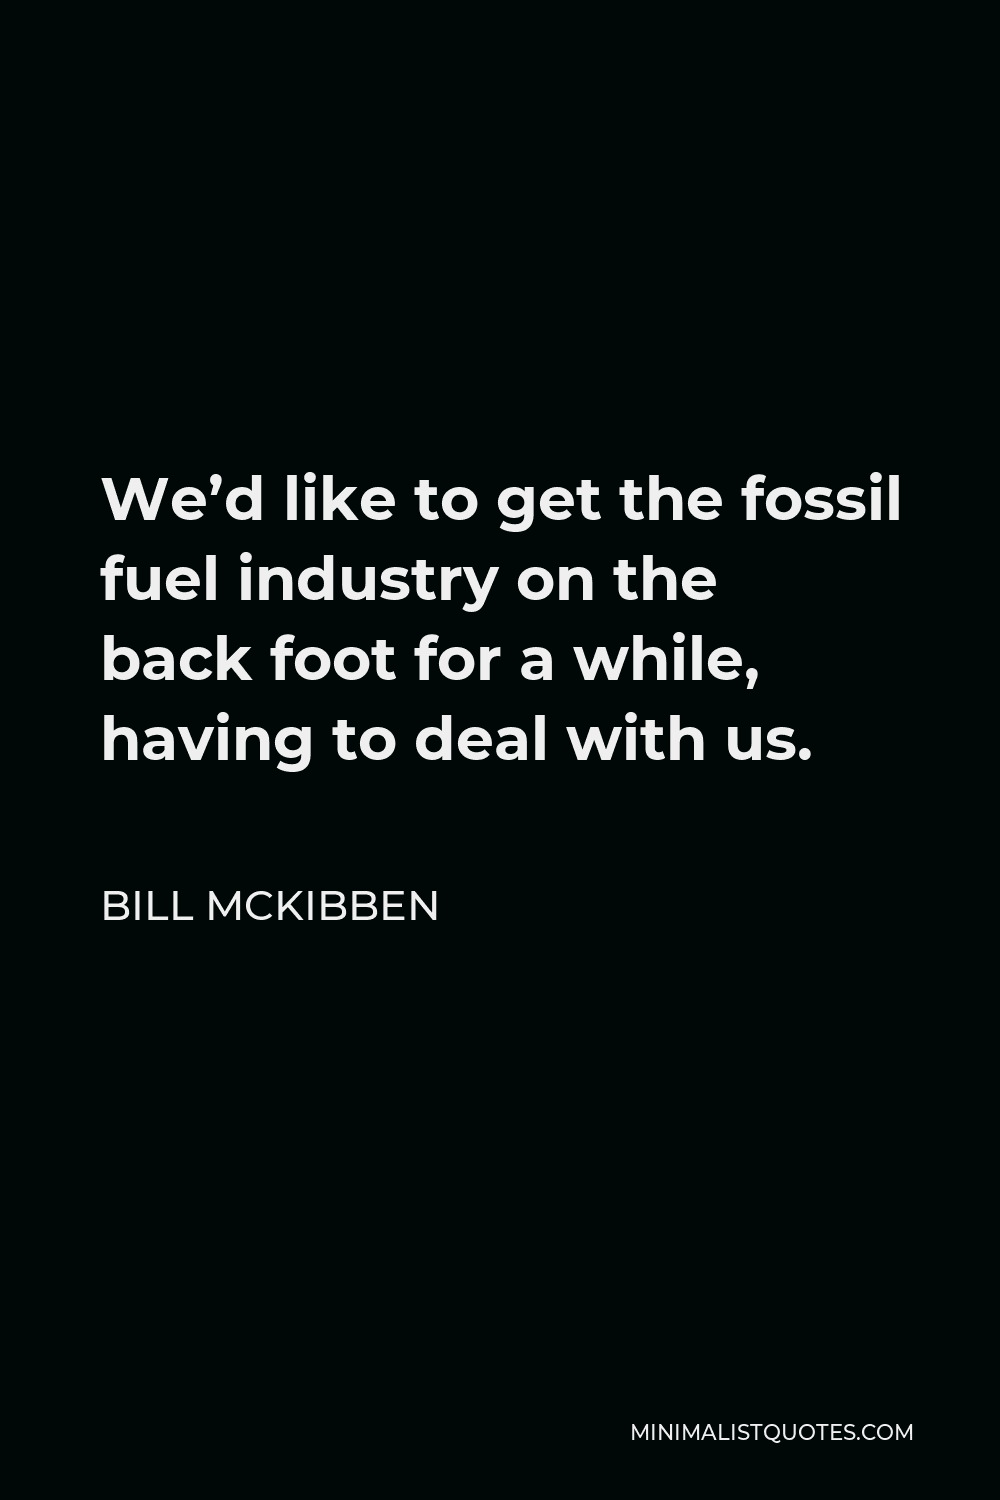 Bill McKibben Quote - We’d like to get the fossil fuel industry on the back foot for a while, having to deal with us.